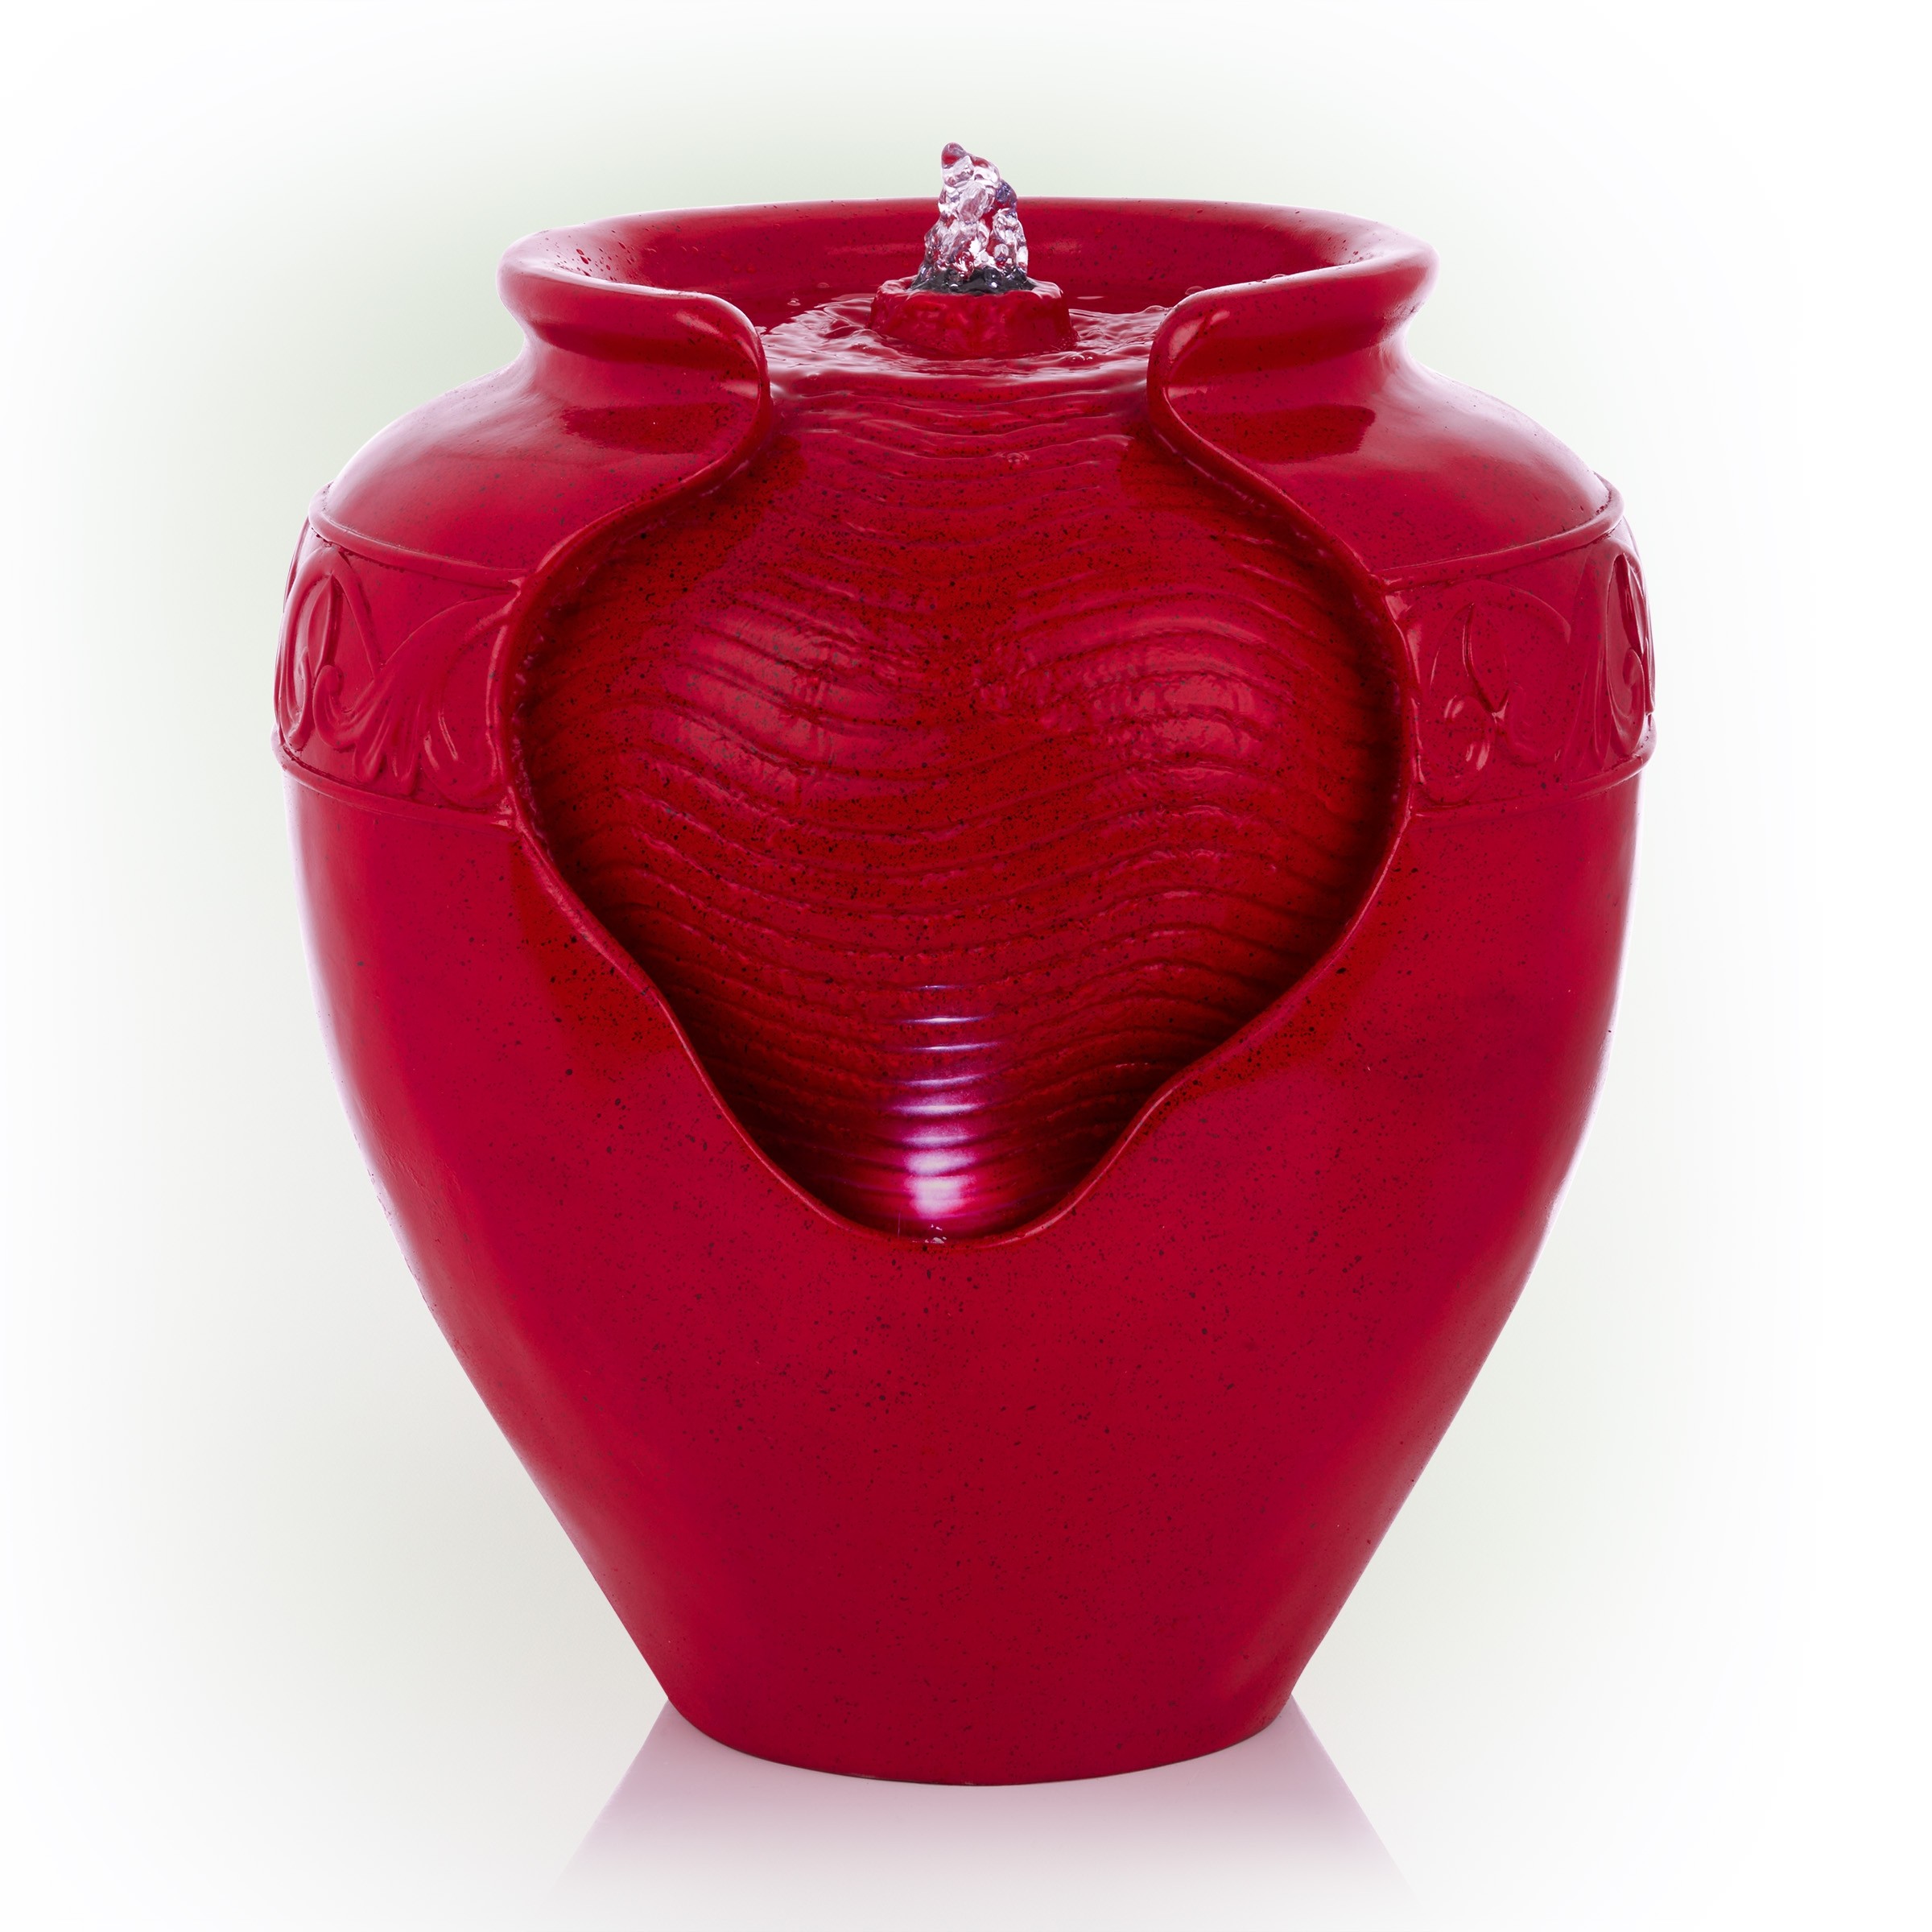 CHERRY RED VASE FOUNTAIN WITH LED LIGHTS 